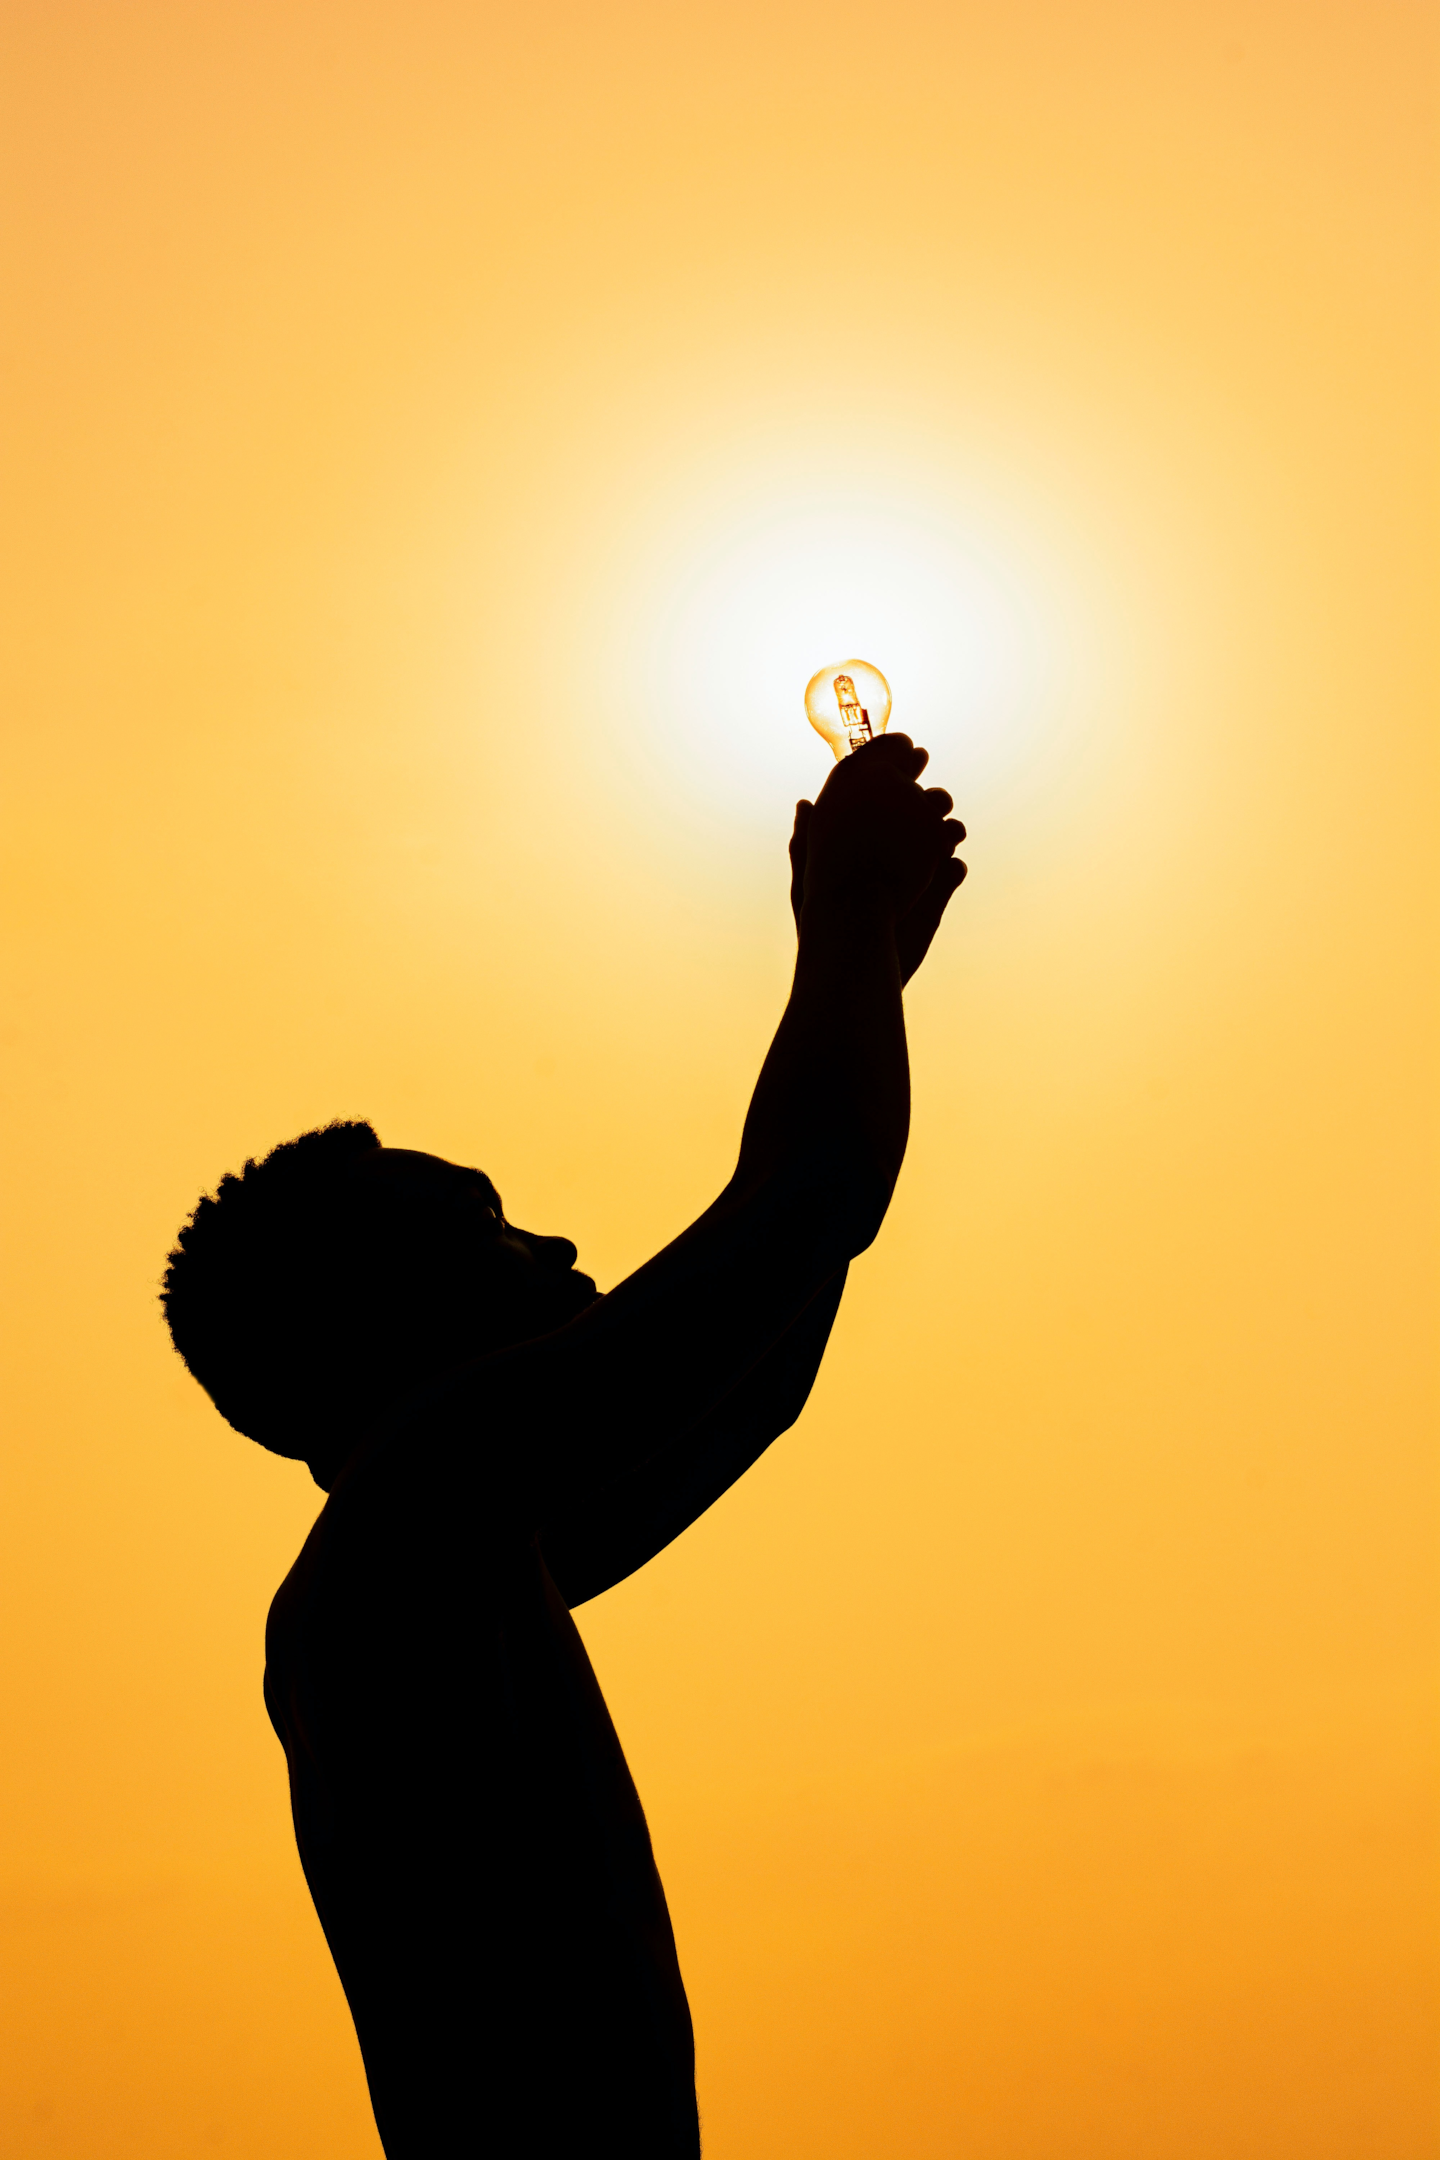 A man reaches towards a gold sky and cups a lightbulb in his hands, with the sun in the background.